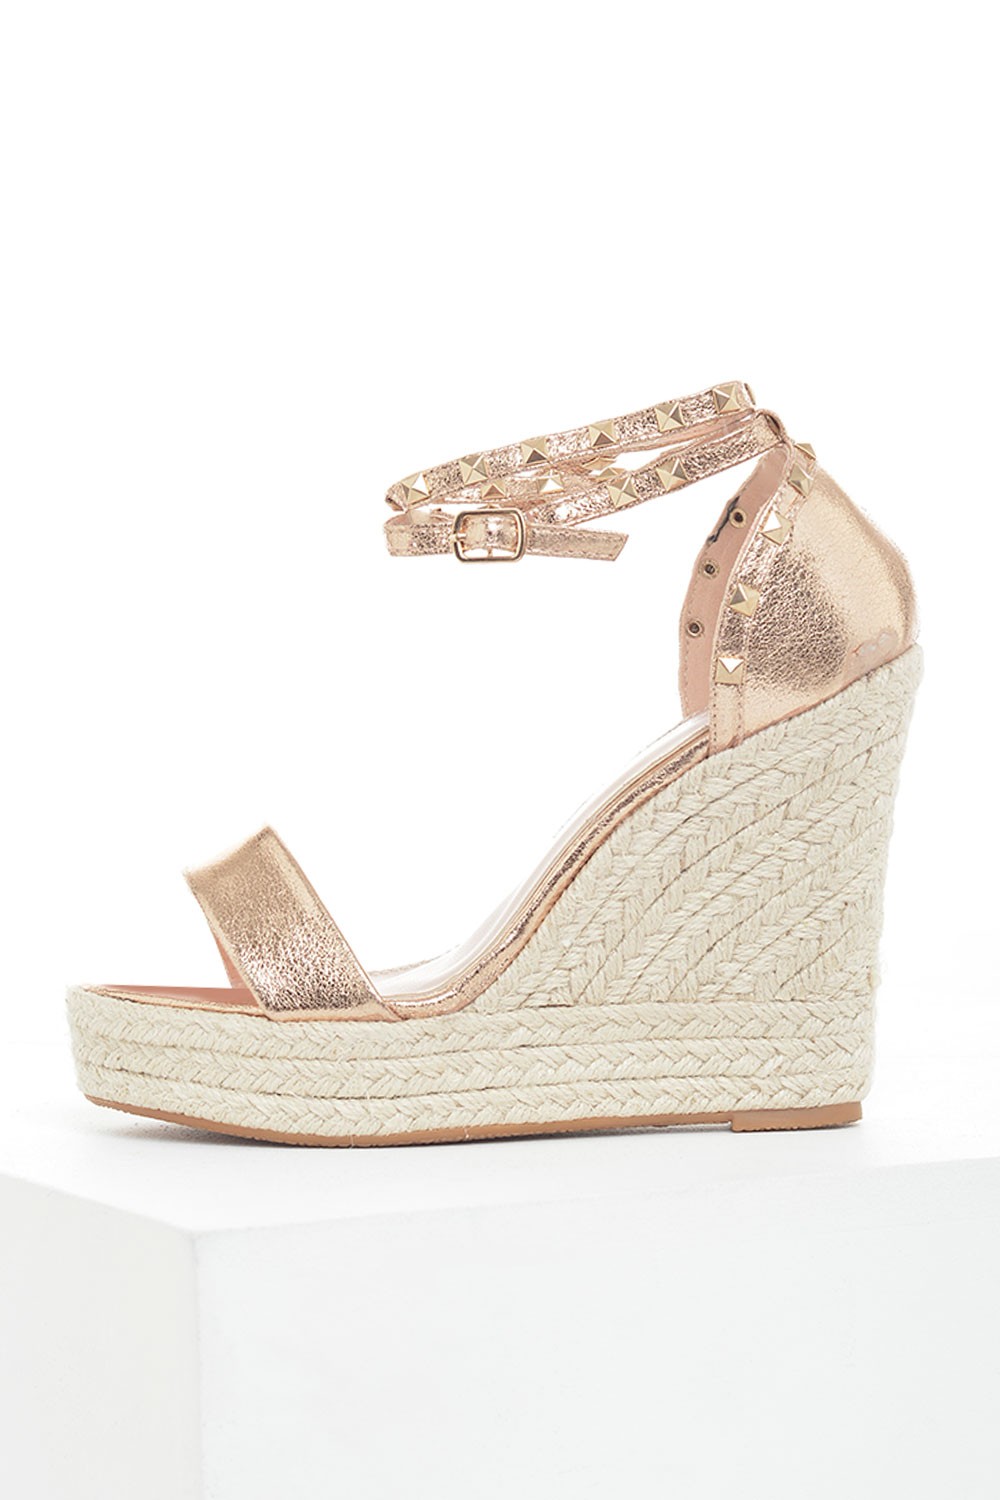 No Doubt Sandy Studded Espadrille Wedges in Rose Gold | iCLOTHING